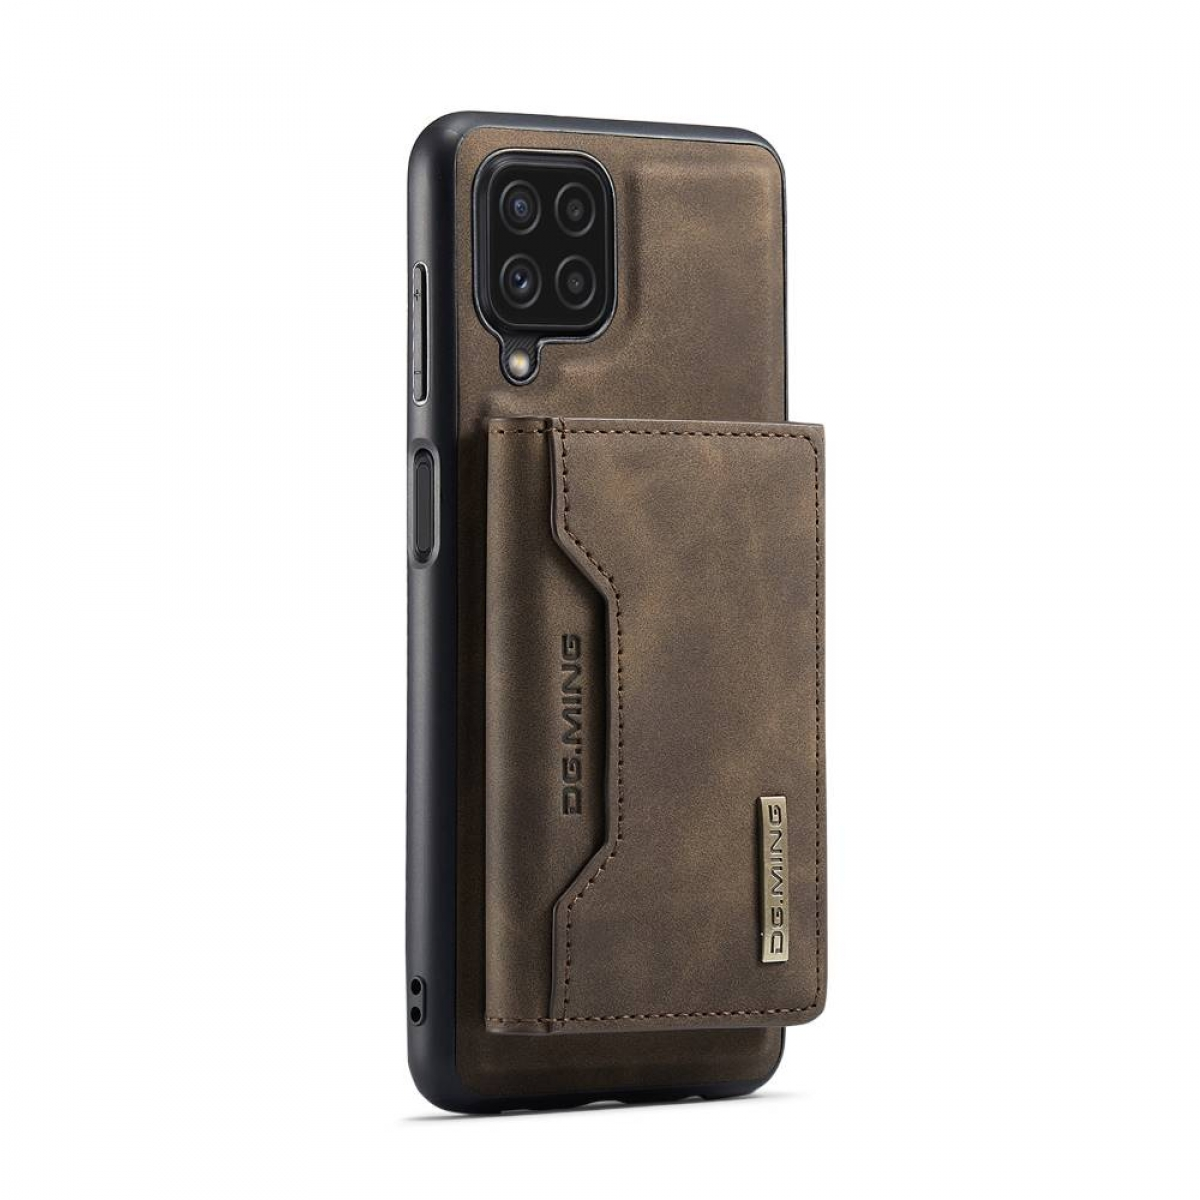 DG MING Samsung, 4G, Galaxy M2 A22 Coffee Backcover, 2in1